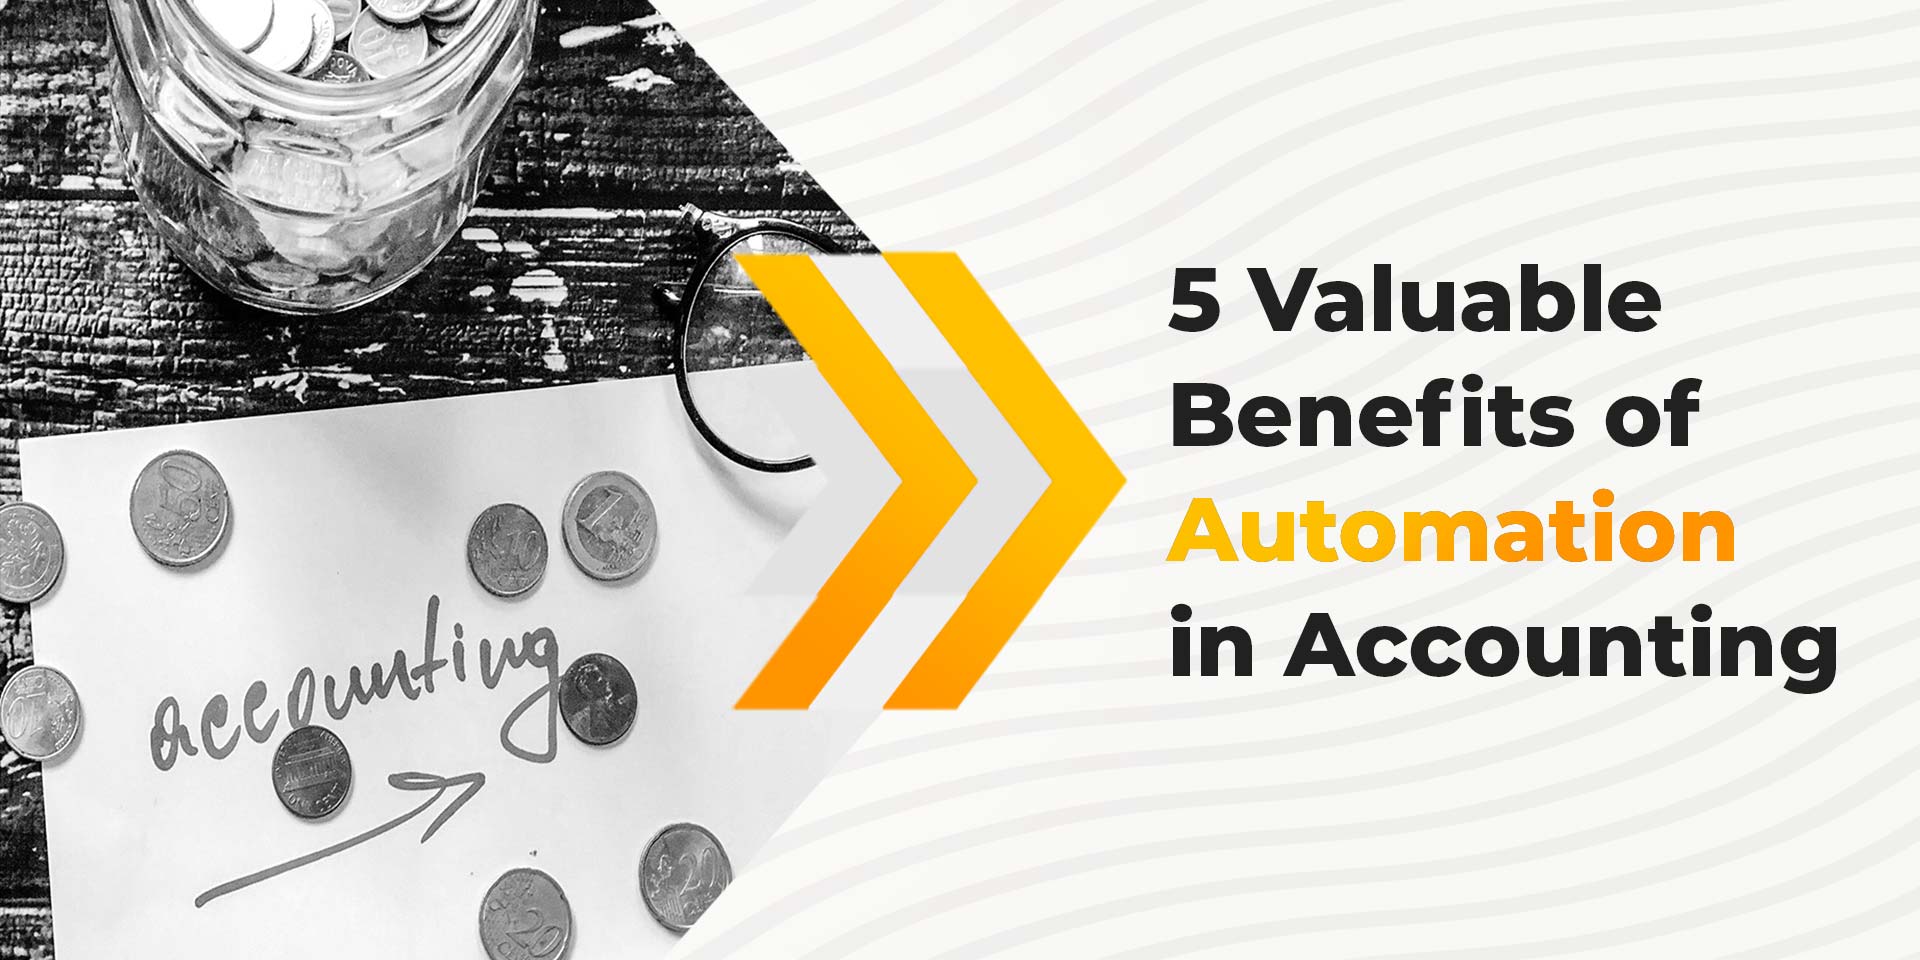 5 Valuable Benefits of Automation in Accounting